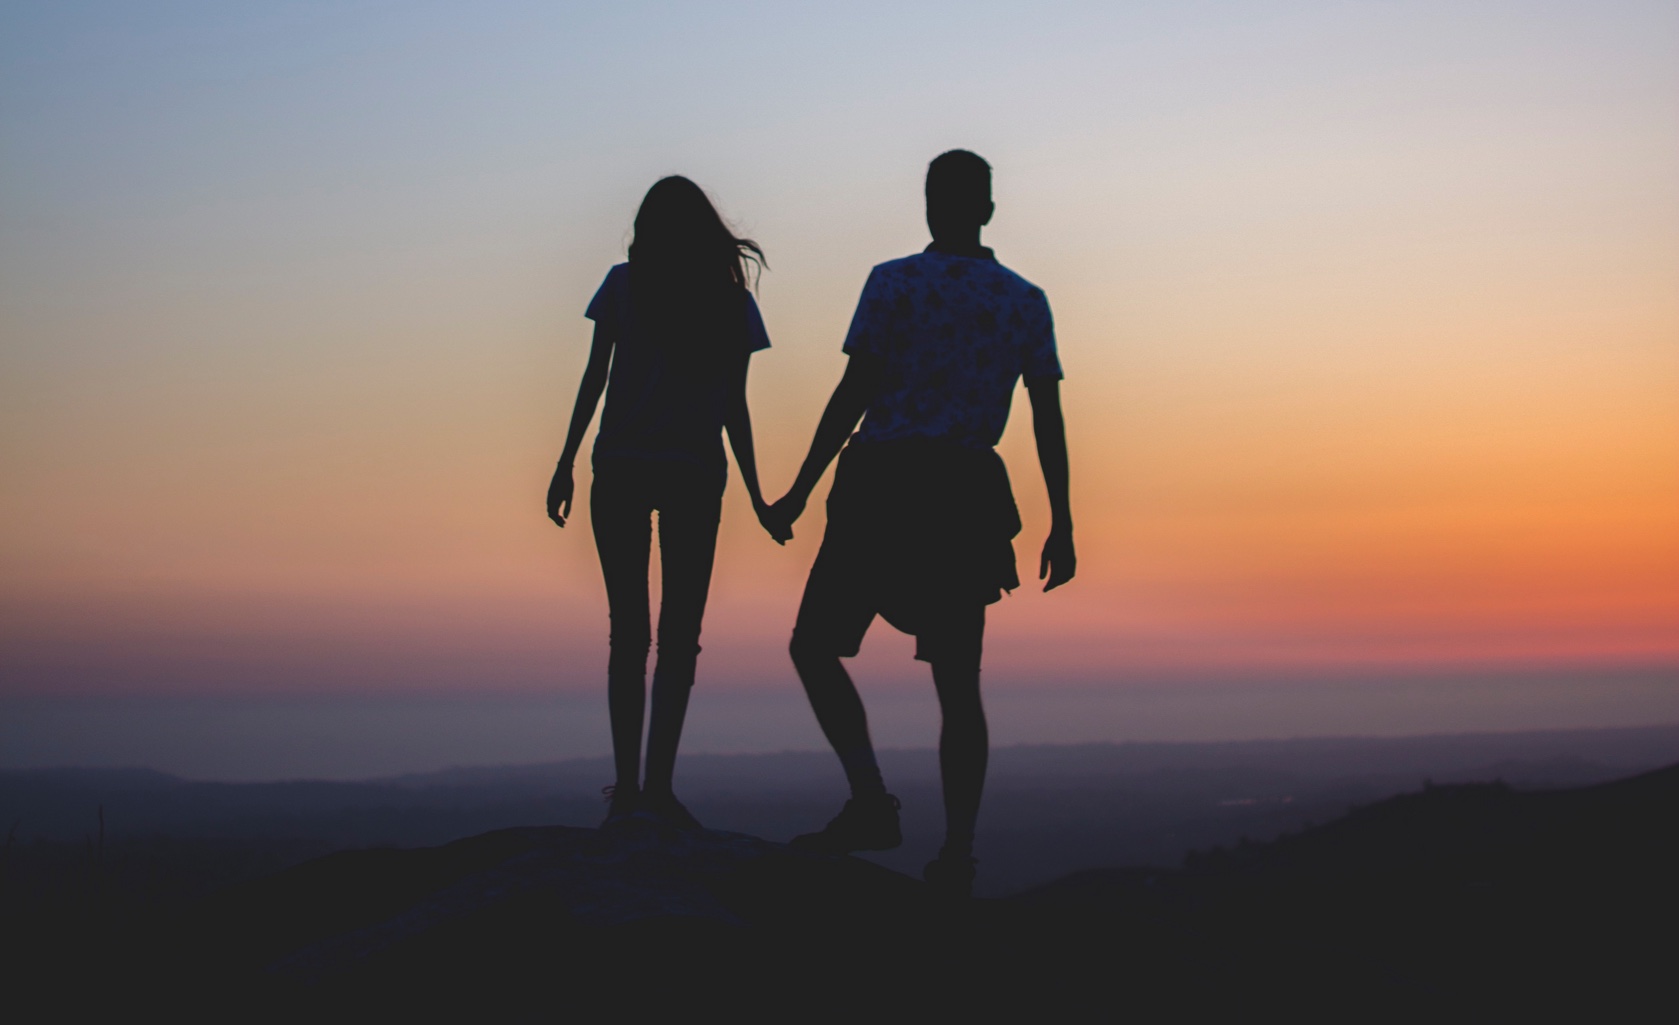 two people holding hands silhouette